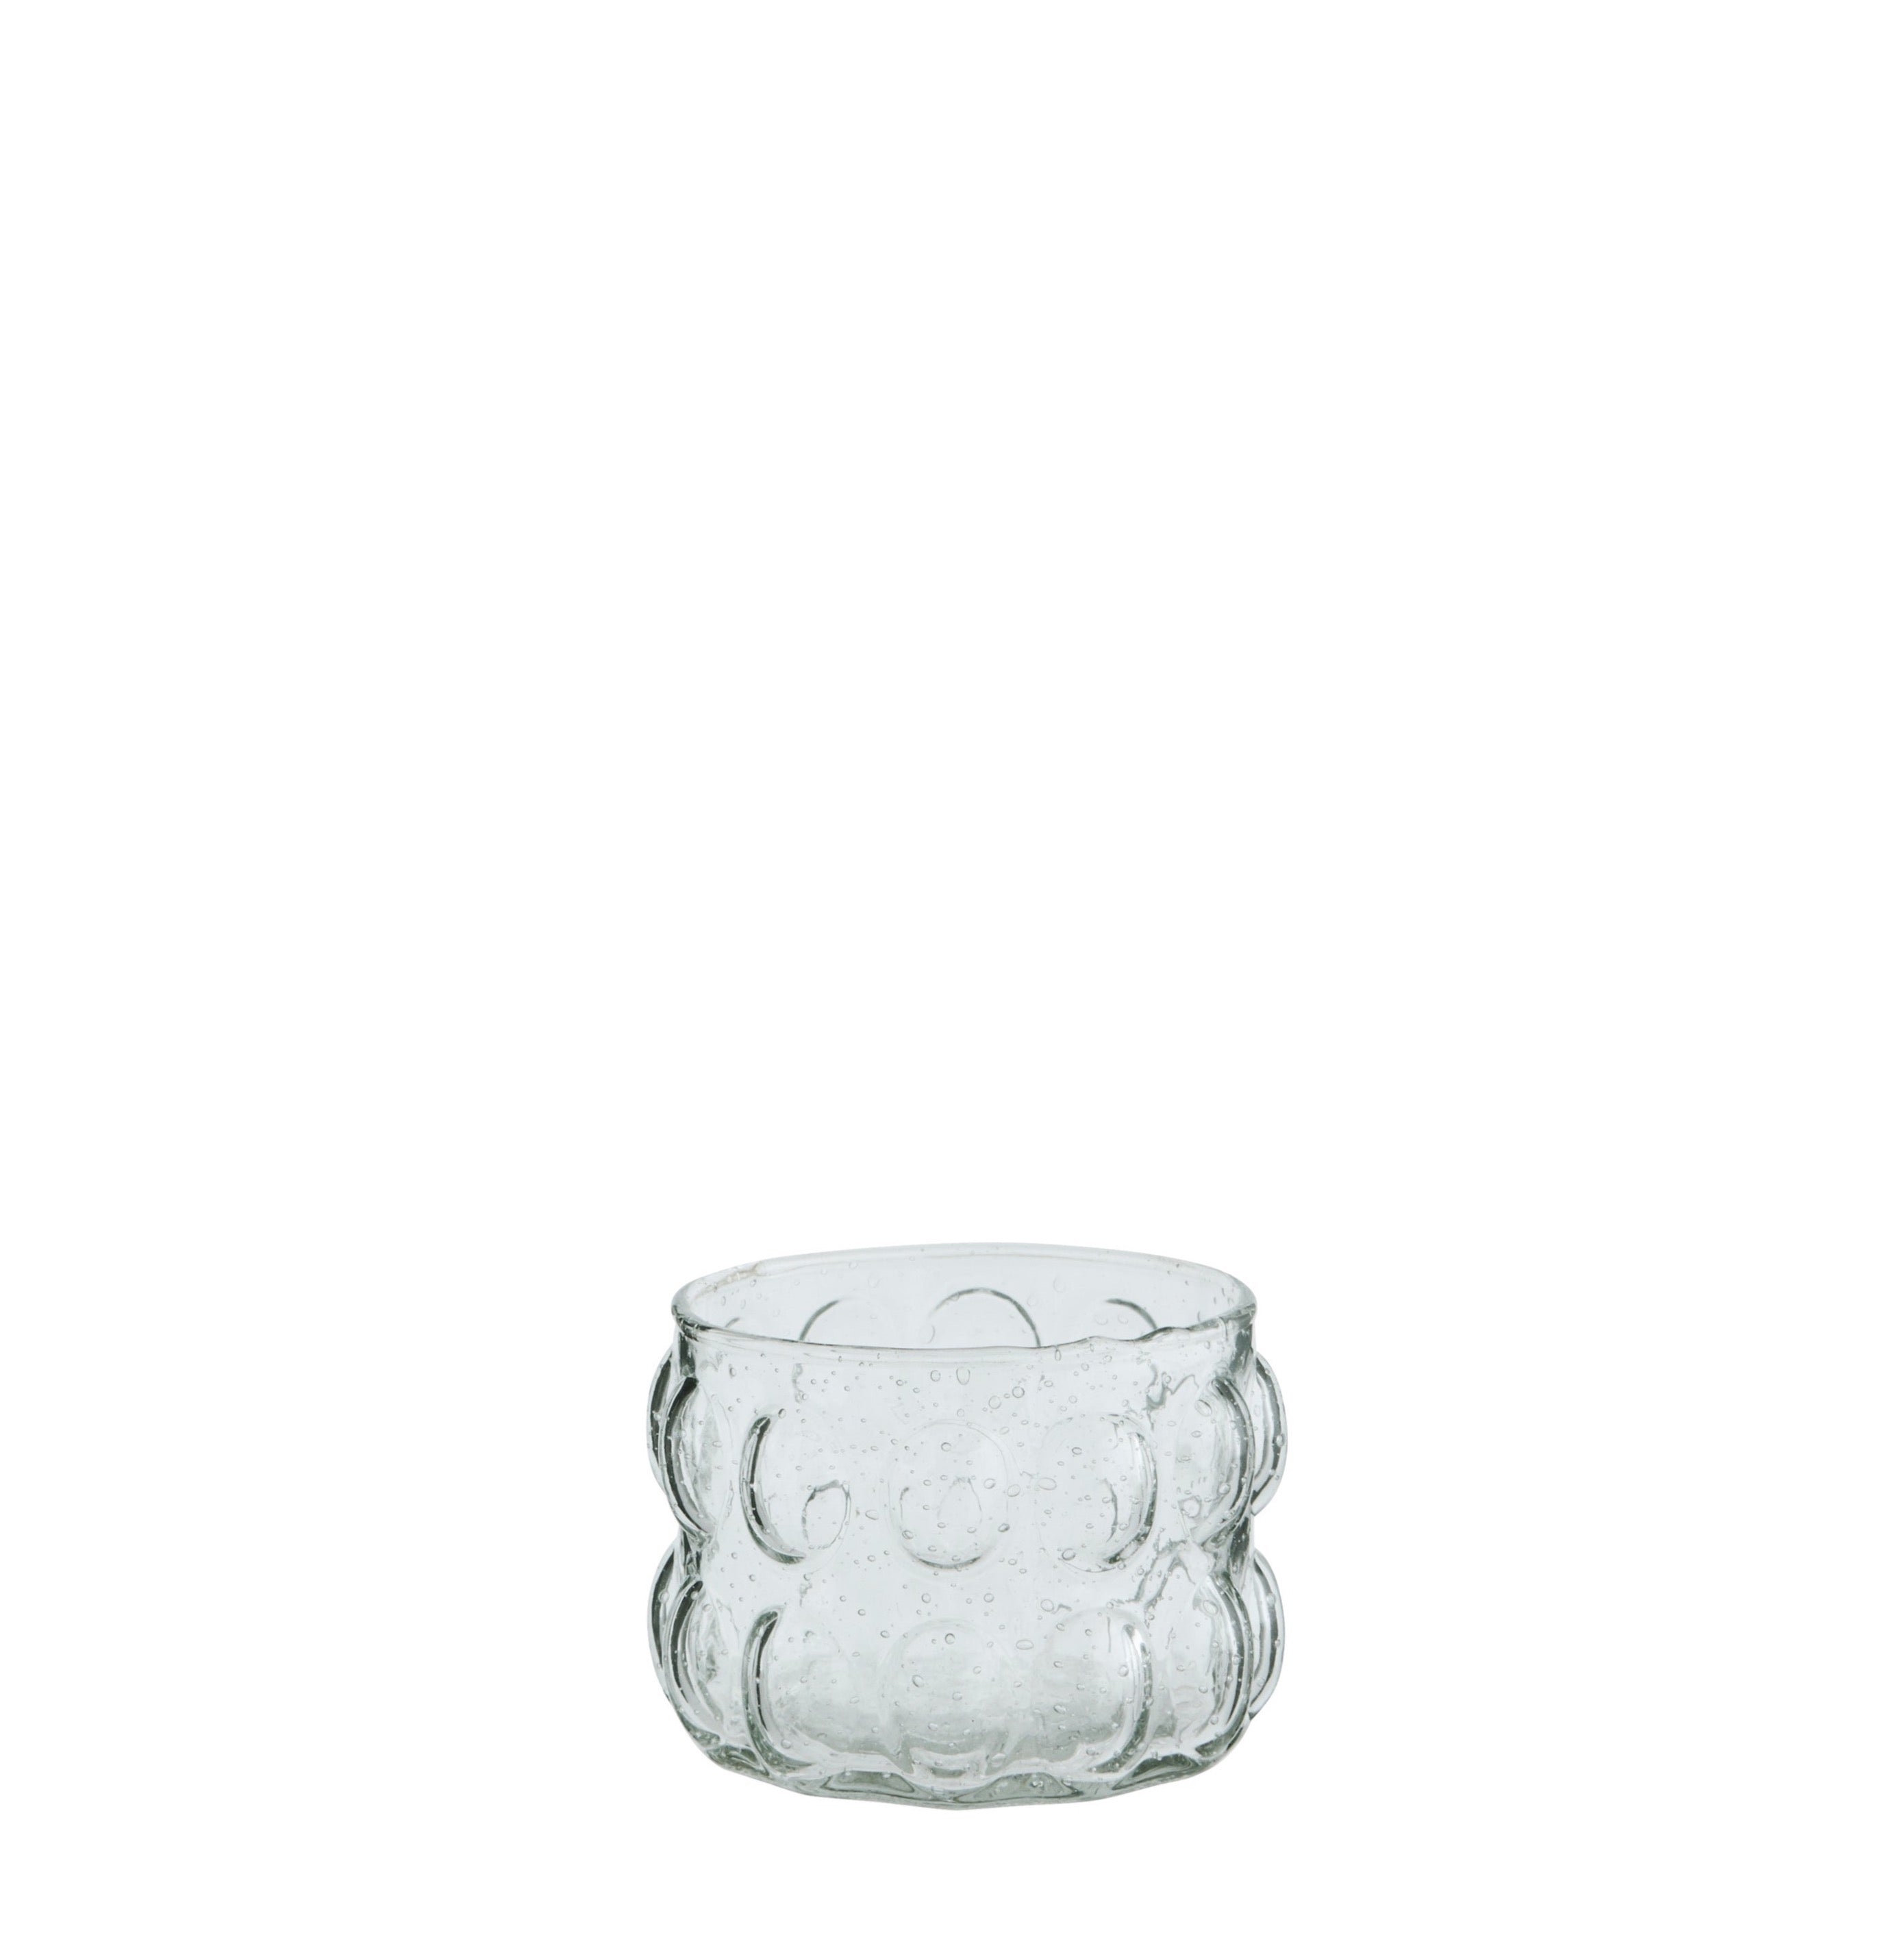 Glass votive with a bubble texture to the glass and two rows of raised oval bumps around the outside.